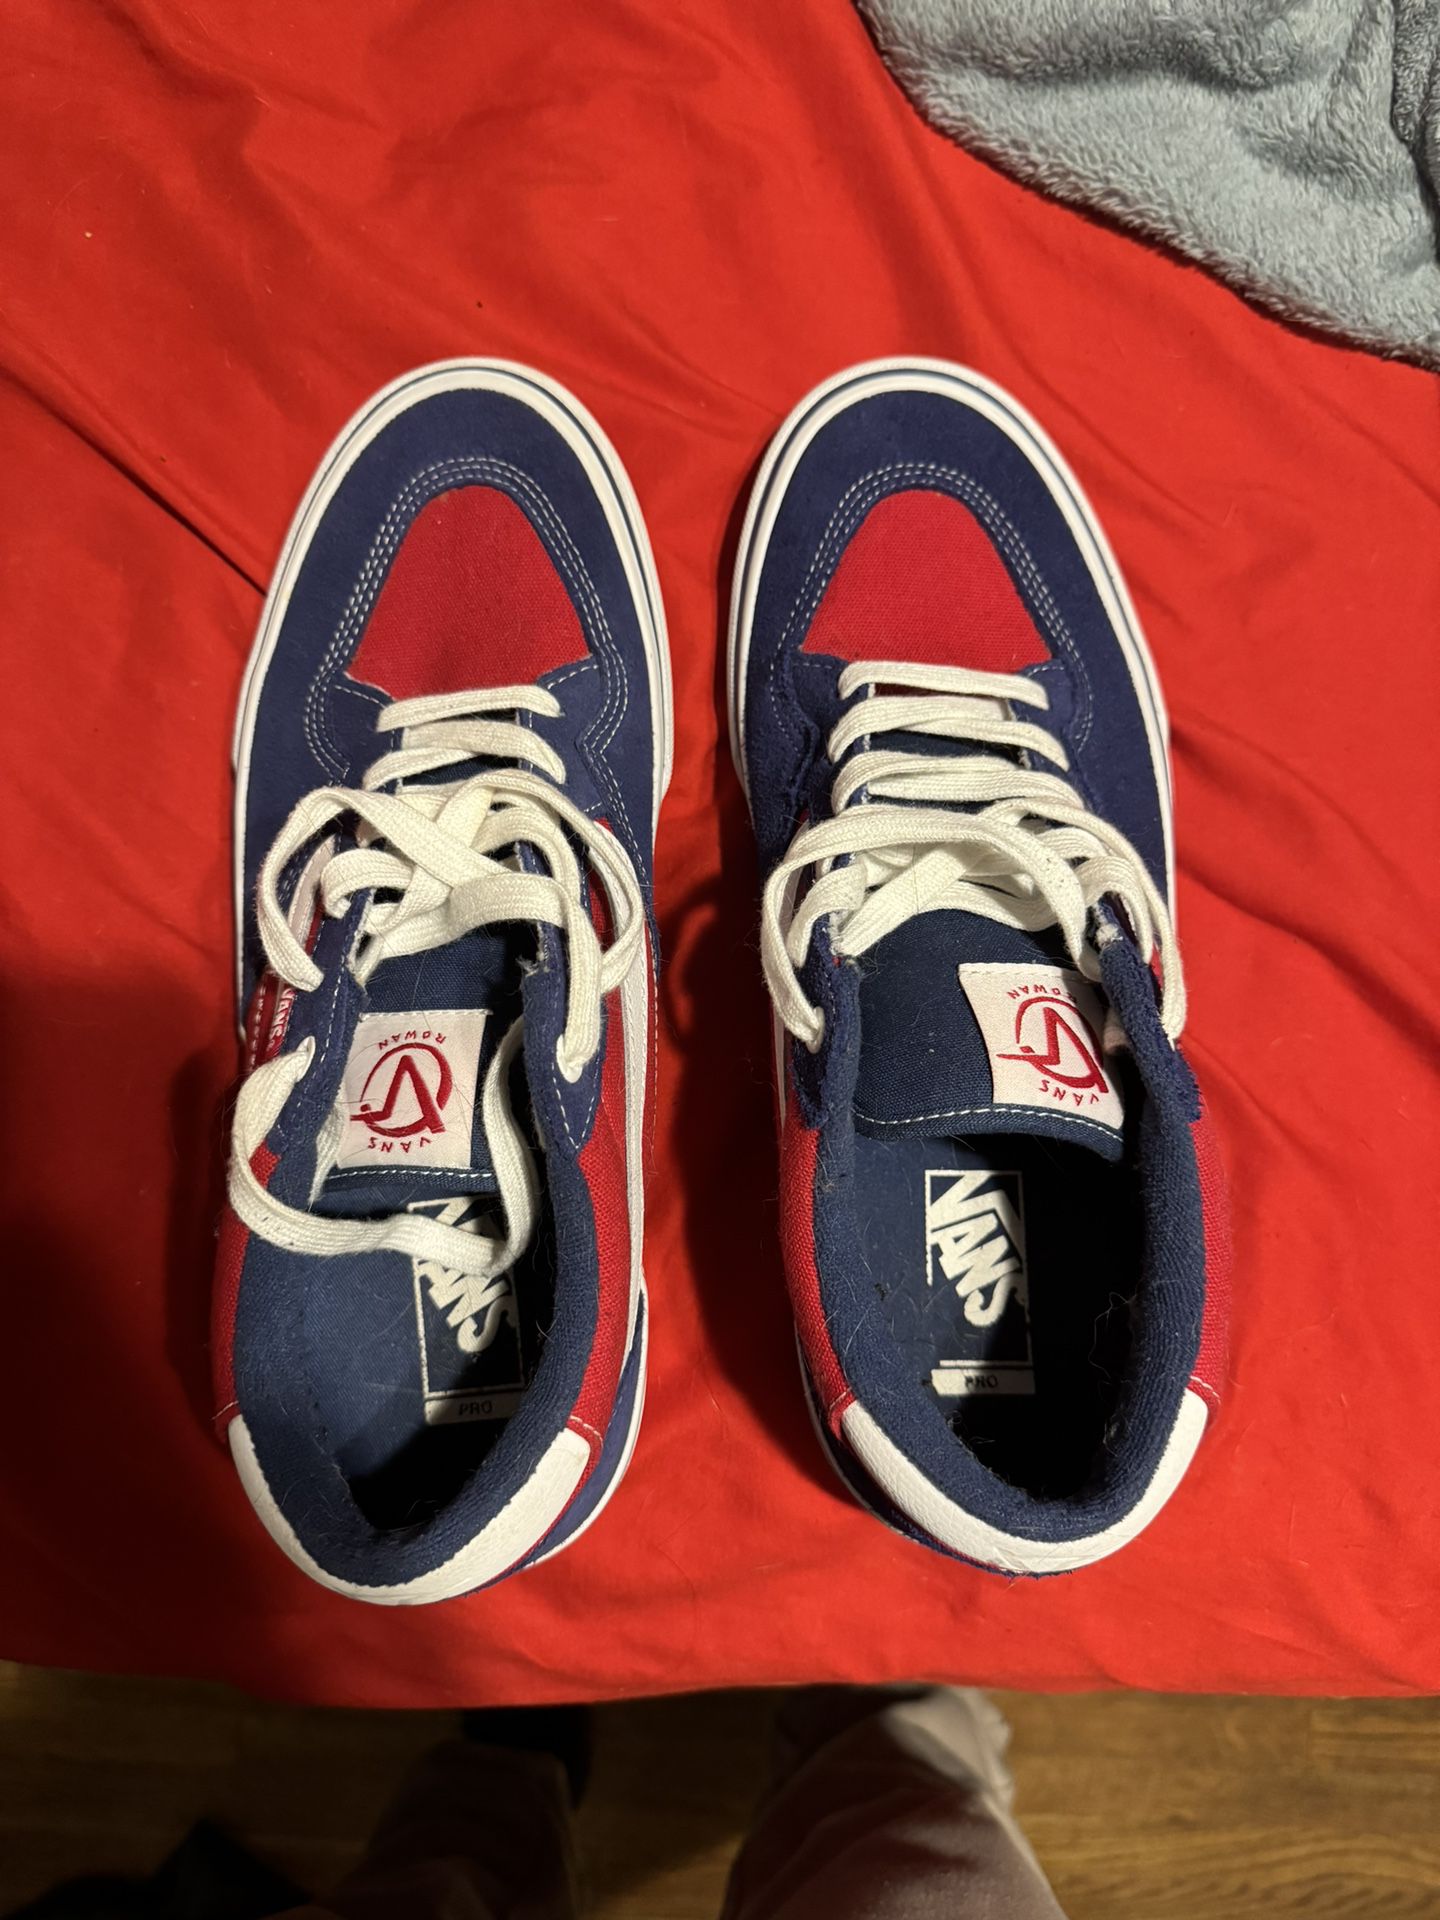 Red, white and blue Vans. Size Men’s 11